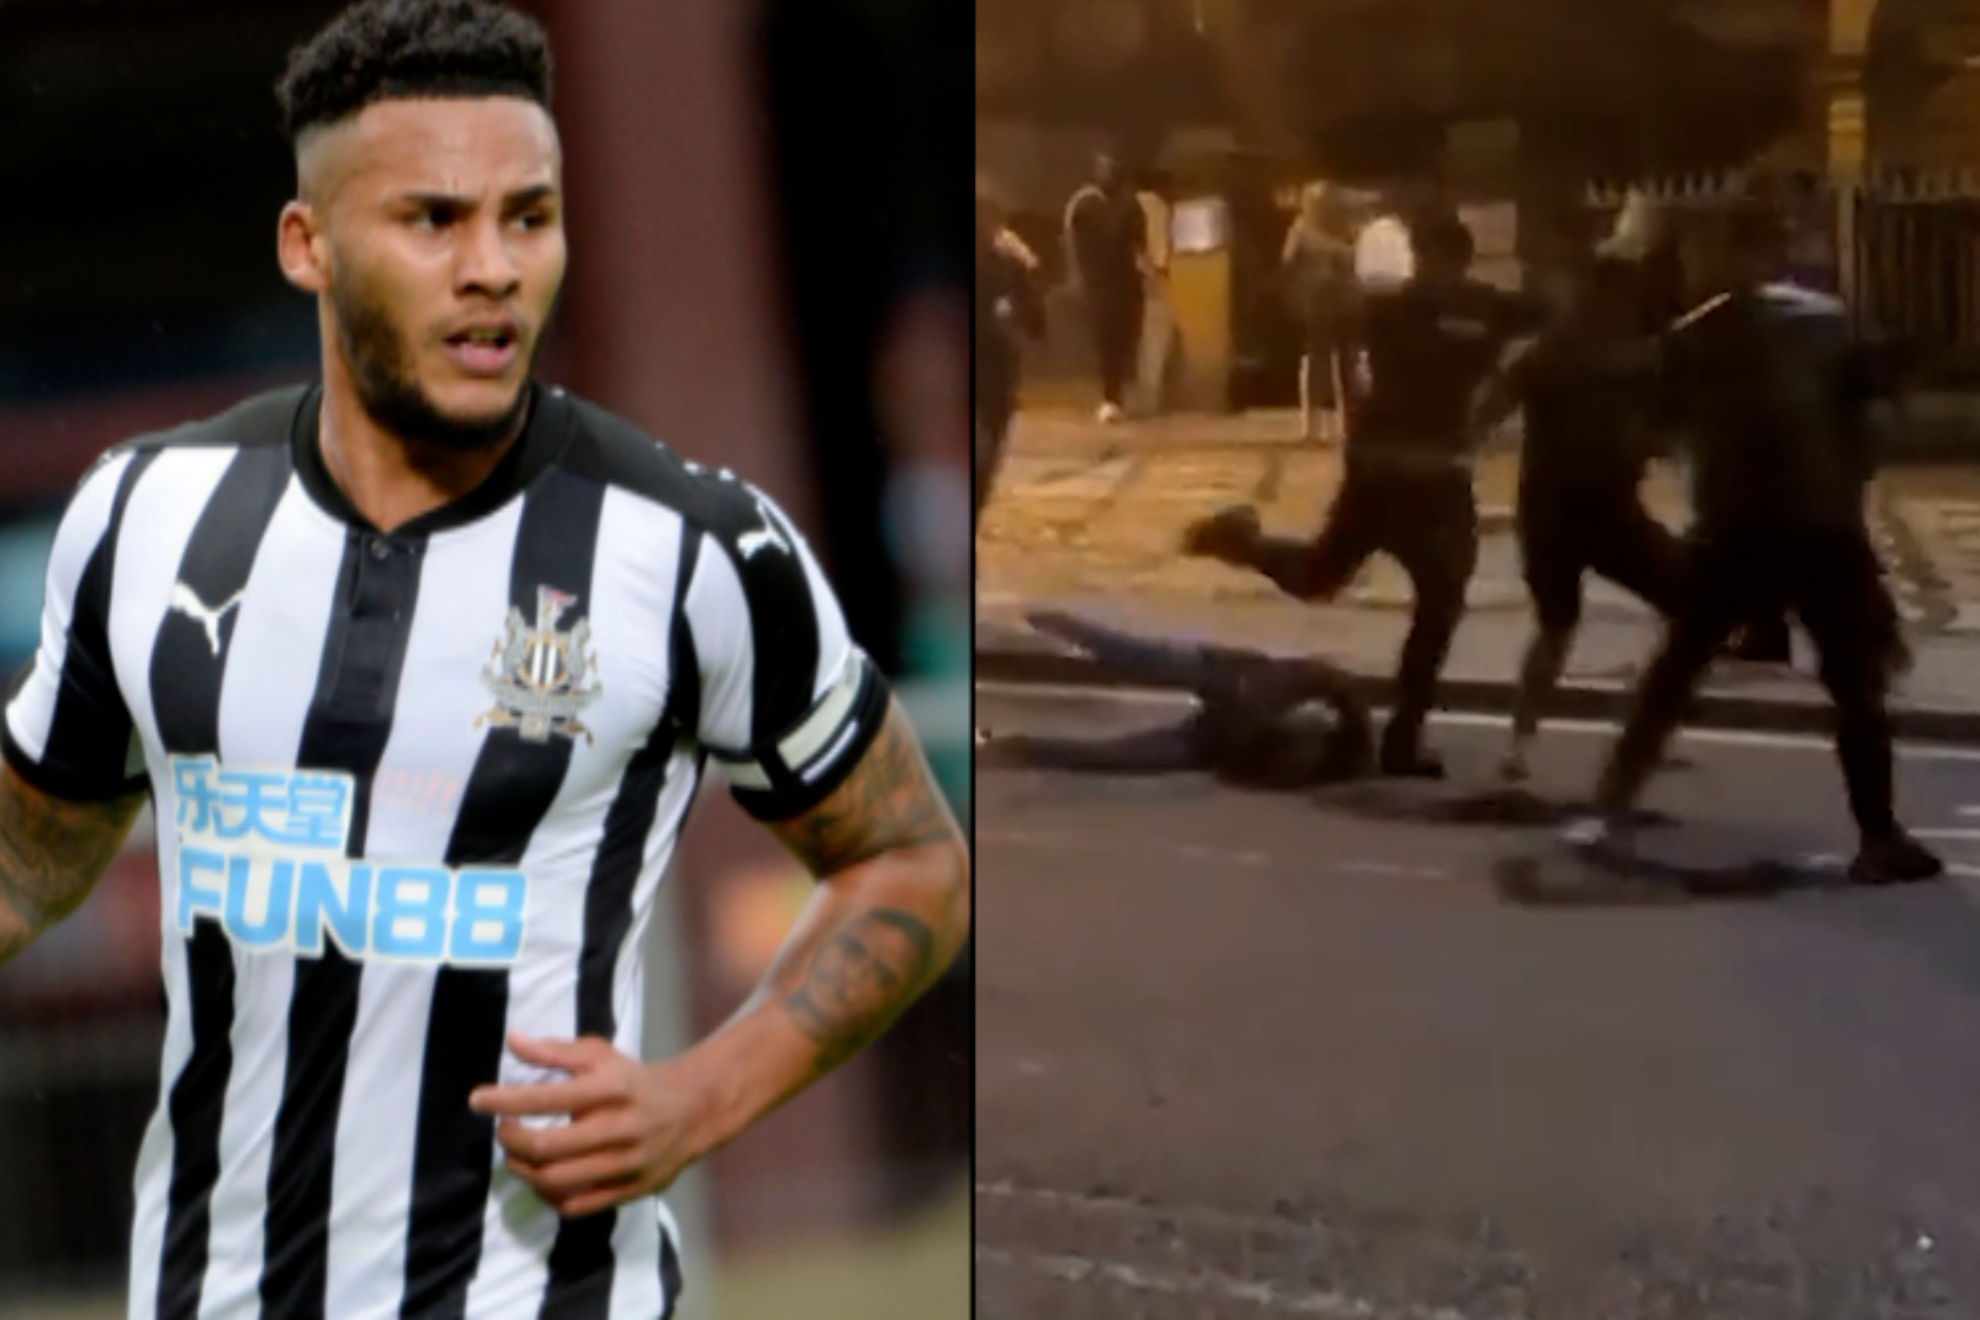 Group of thugs brutally assault Premier League soccer star: "We're going to shoot you"